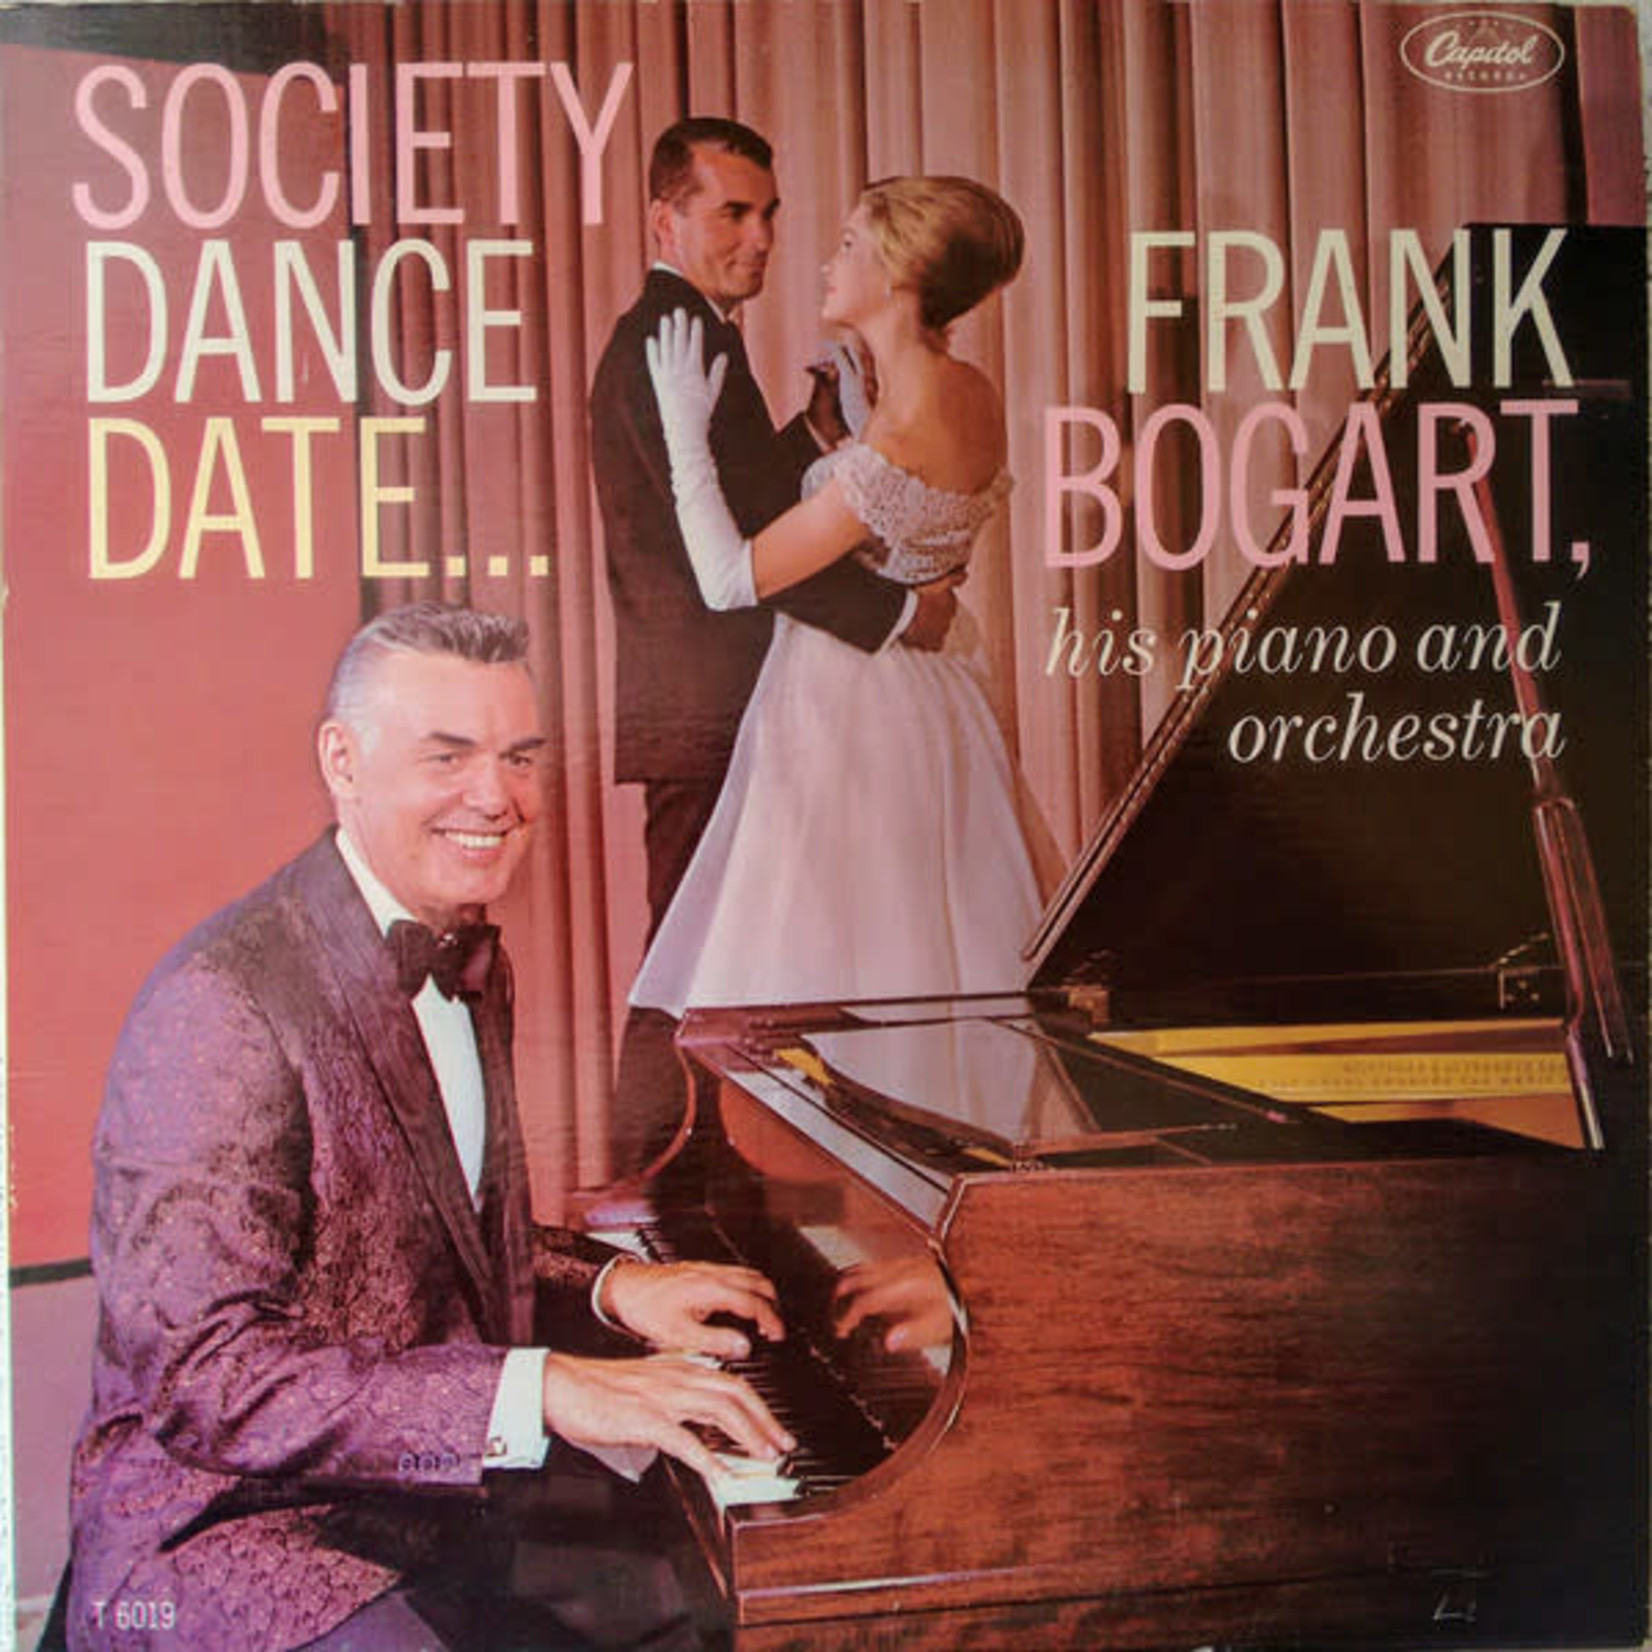 Frank Bogart Frank Bogart, His Piano And Orchestra ‎– Society Dance Date... (G)